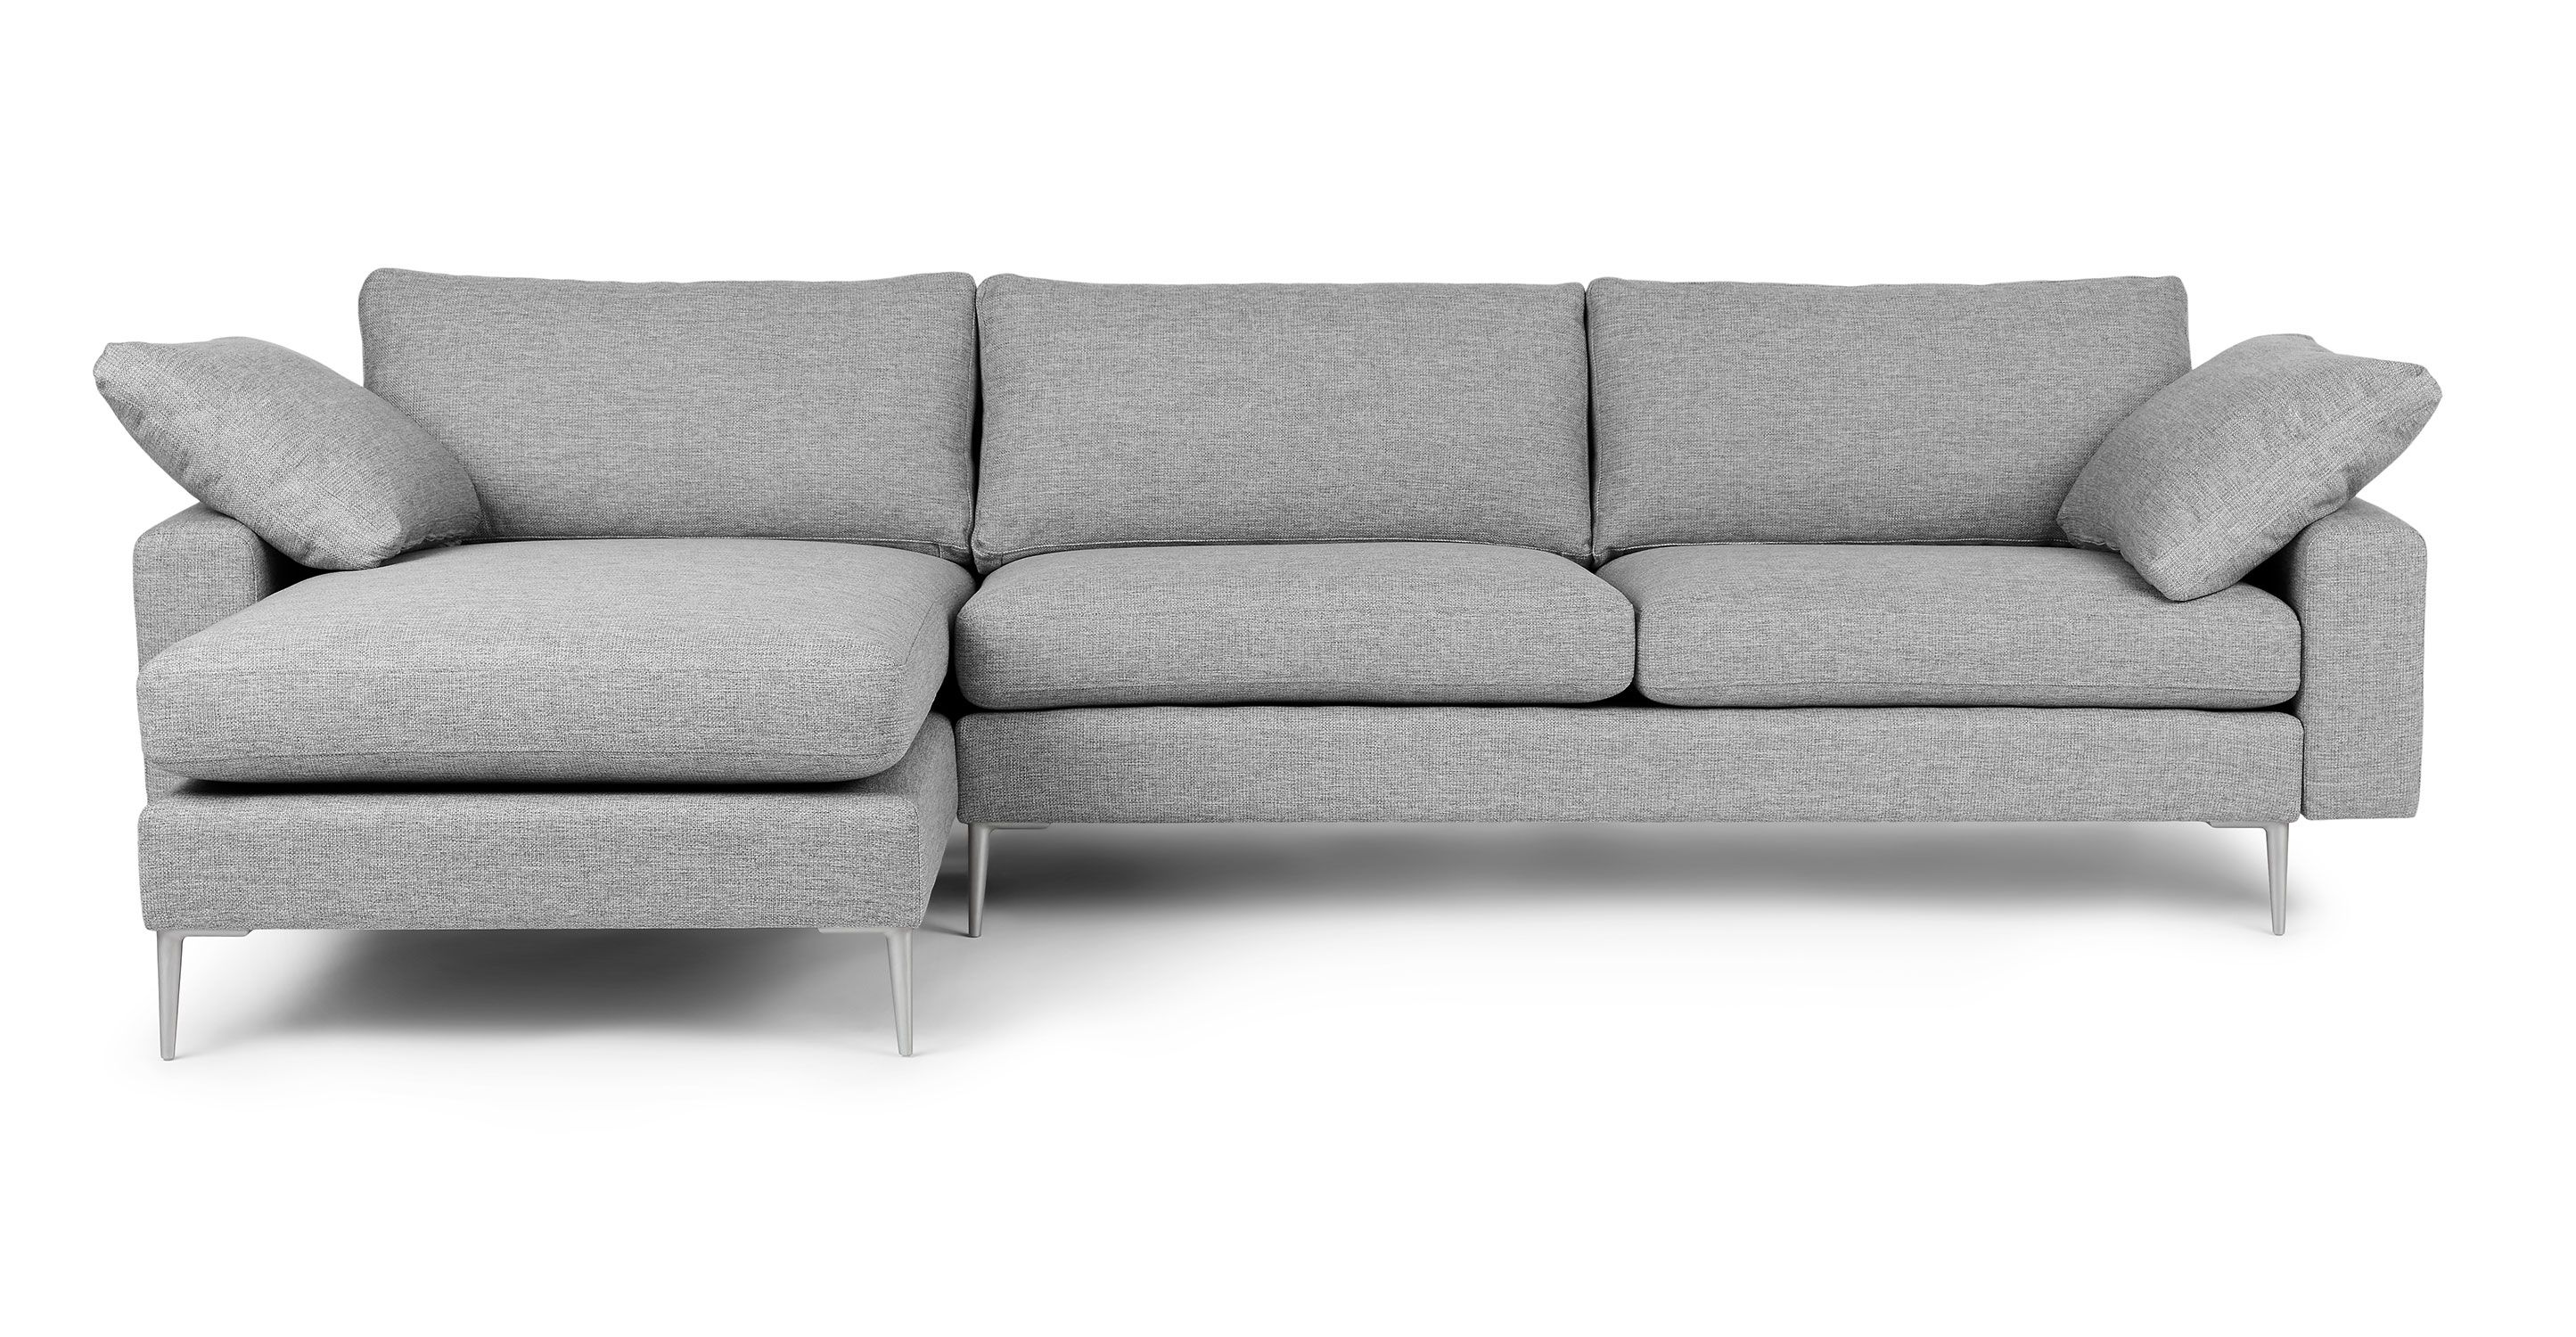 Winter Gray Reversible Fabric Sectional | Nova | Article Pertaining To Reversible Sectional Sofas (View 8 of 15)